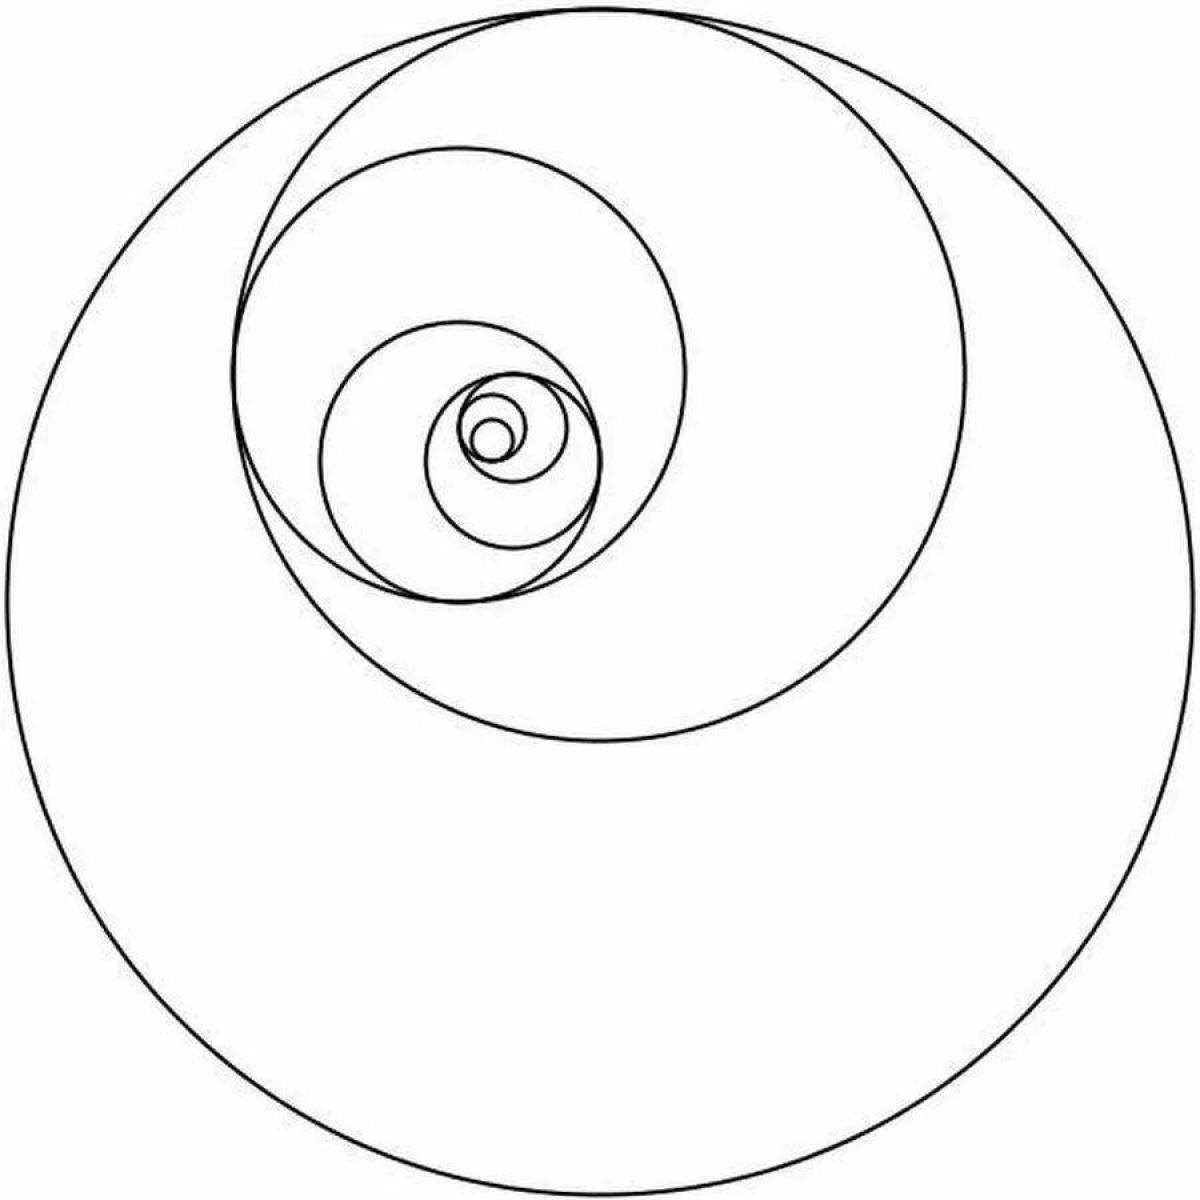 Glitter round spiral coloring page